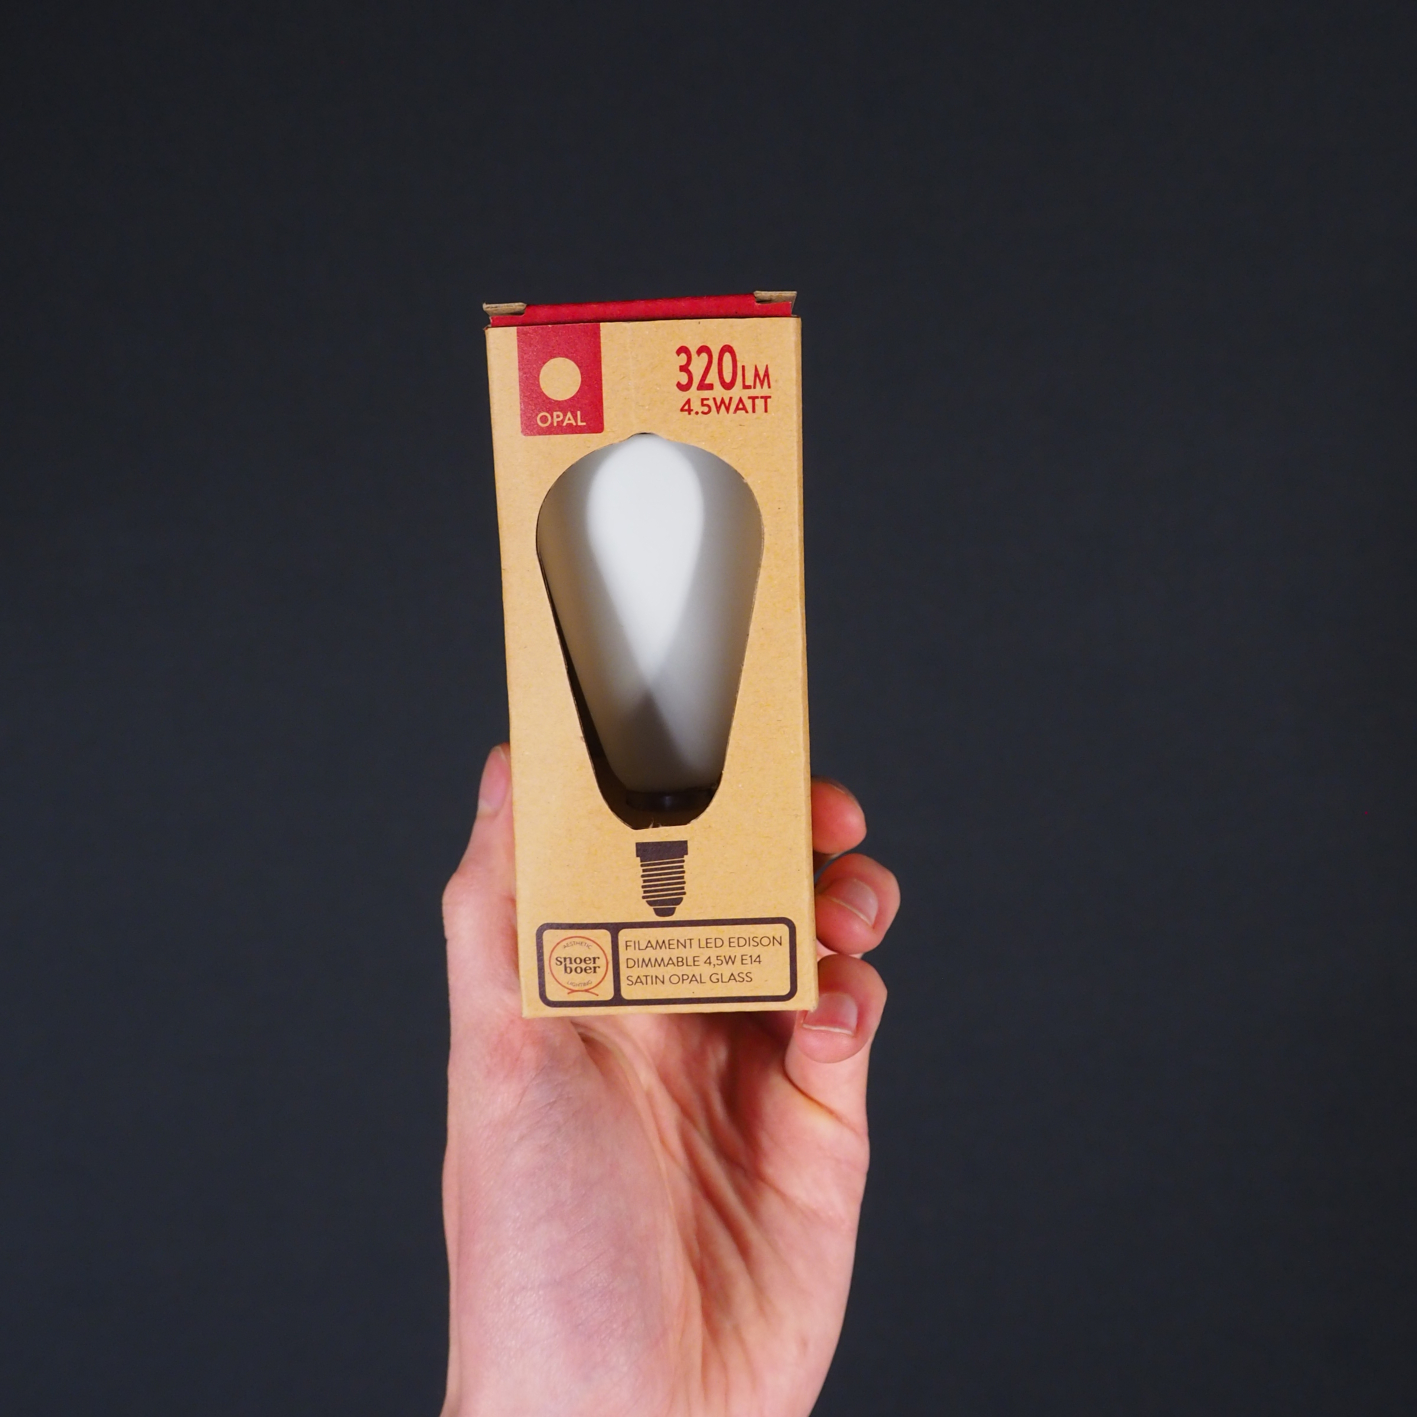 Bulb 'Filament Led Edison 46MM' by Snoerboer (4,5W, E14, Dimmable) - Satin opal glass